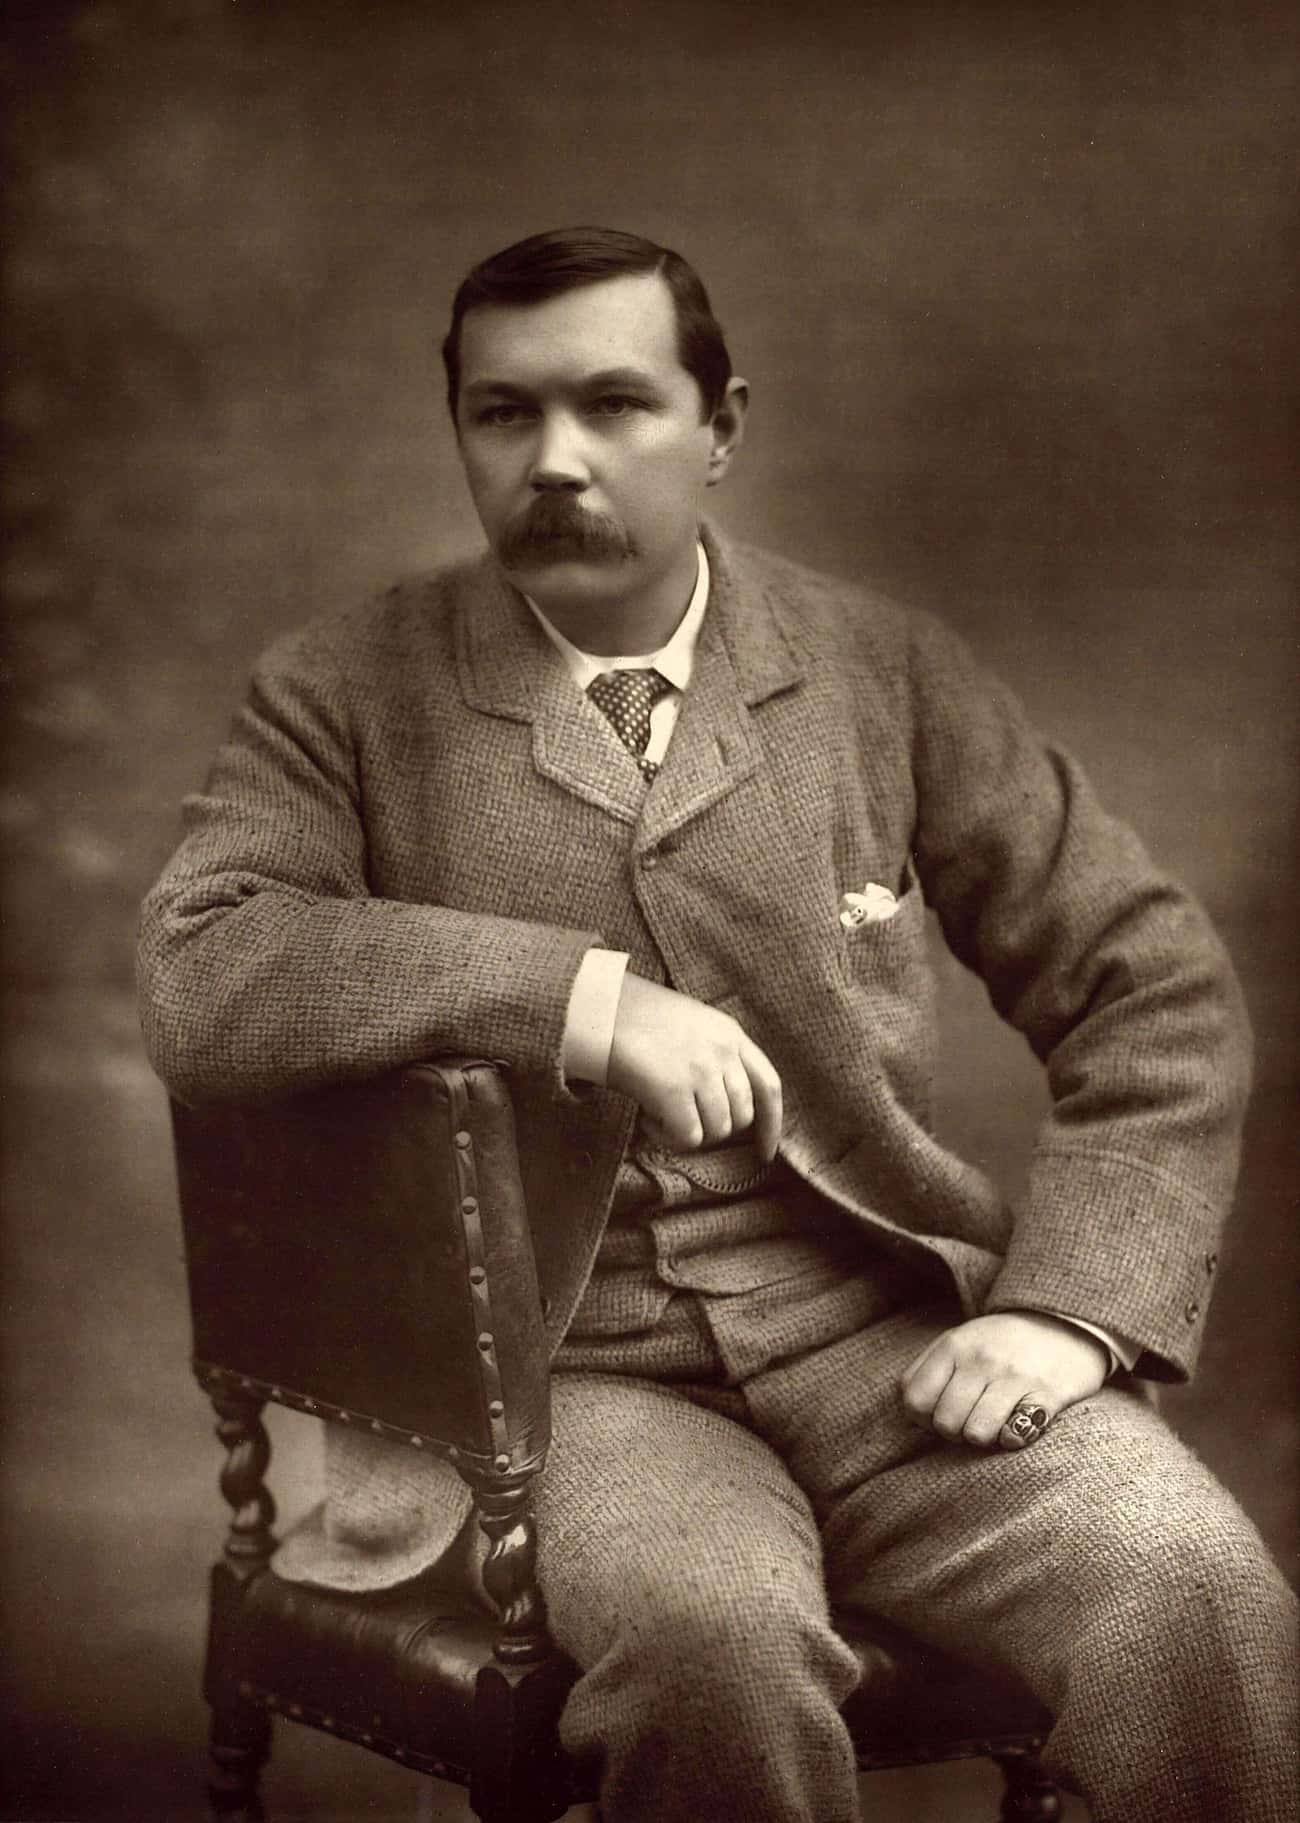 Academics Like Sir Arthur Conan Doyle Bolstered The Emerging Field Of 'Spiritualism' In The 1920s